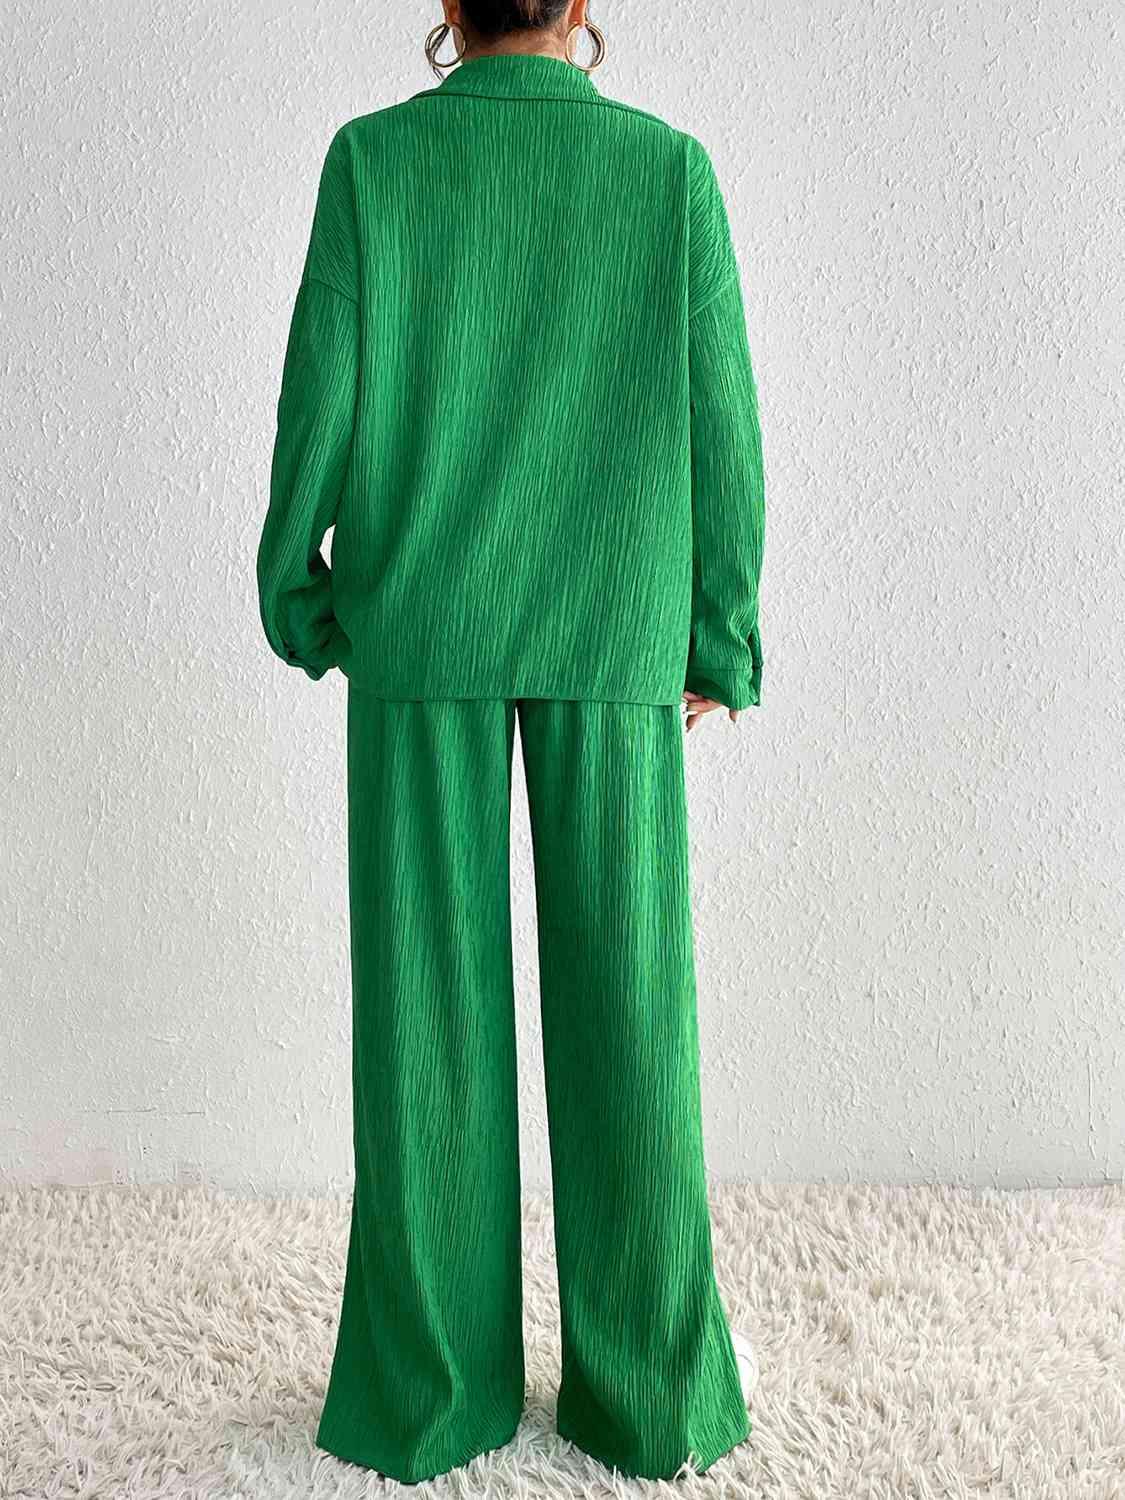 a woman in a green suit standing on a white rug